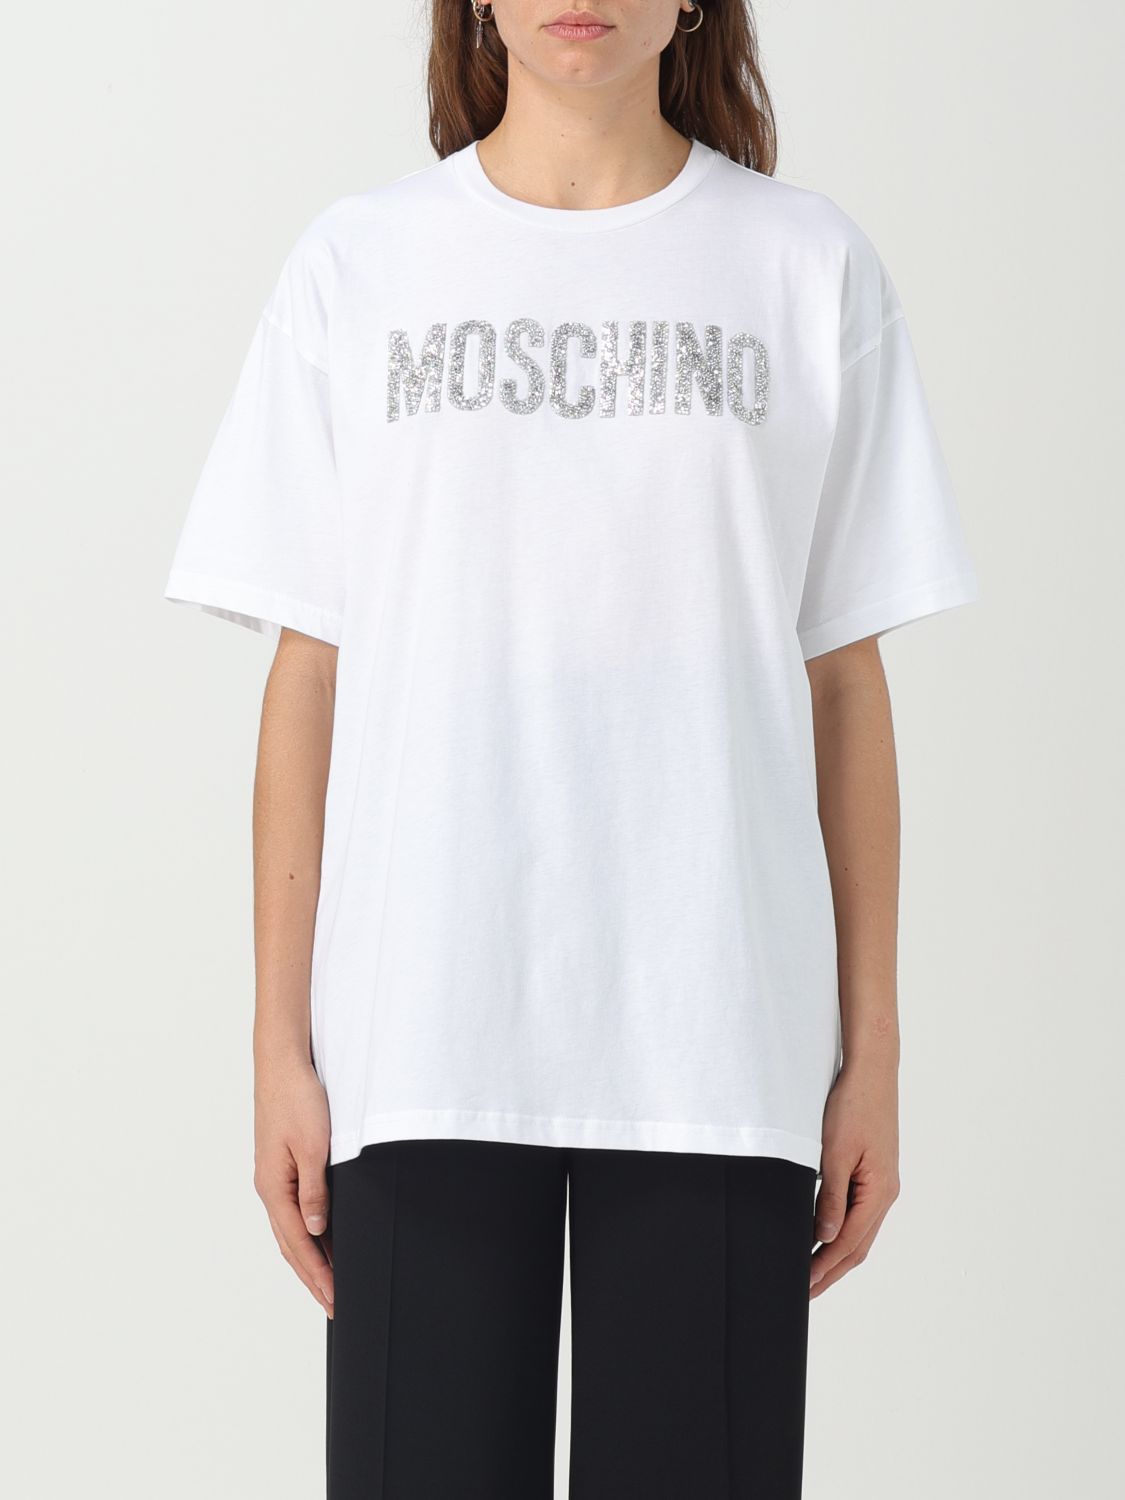 Moschino Couture T-shirt  Damen Farbe Weiss In White